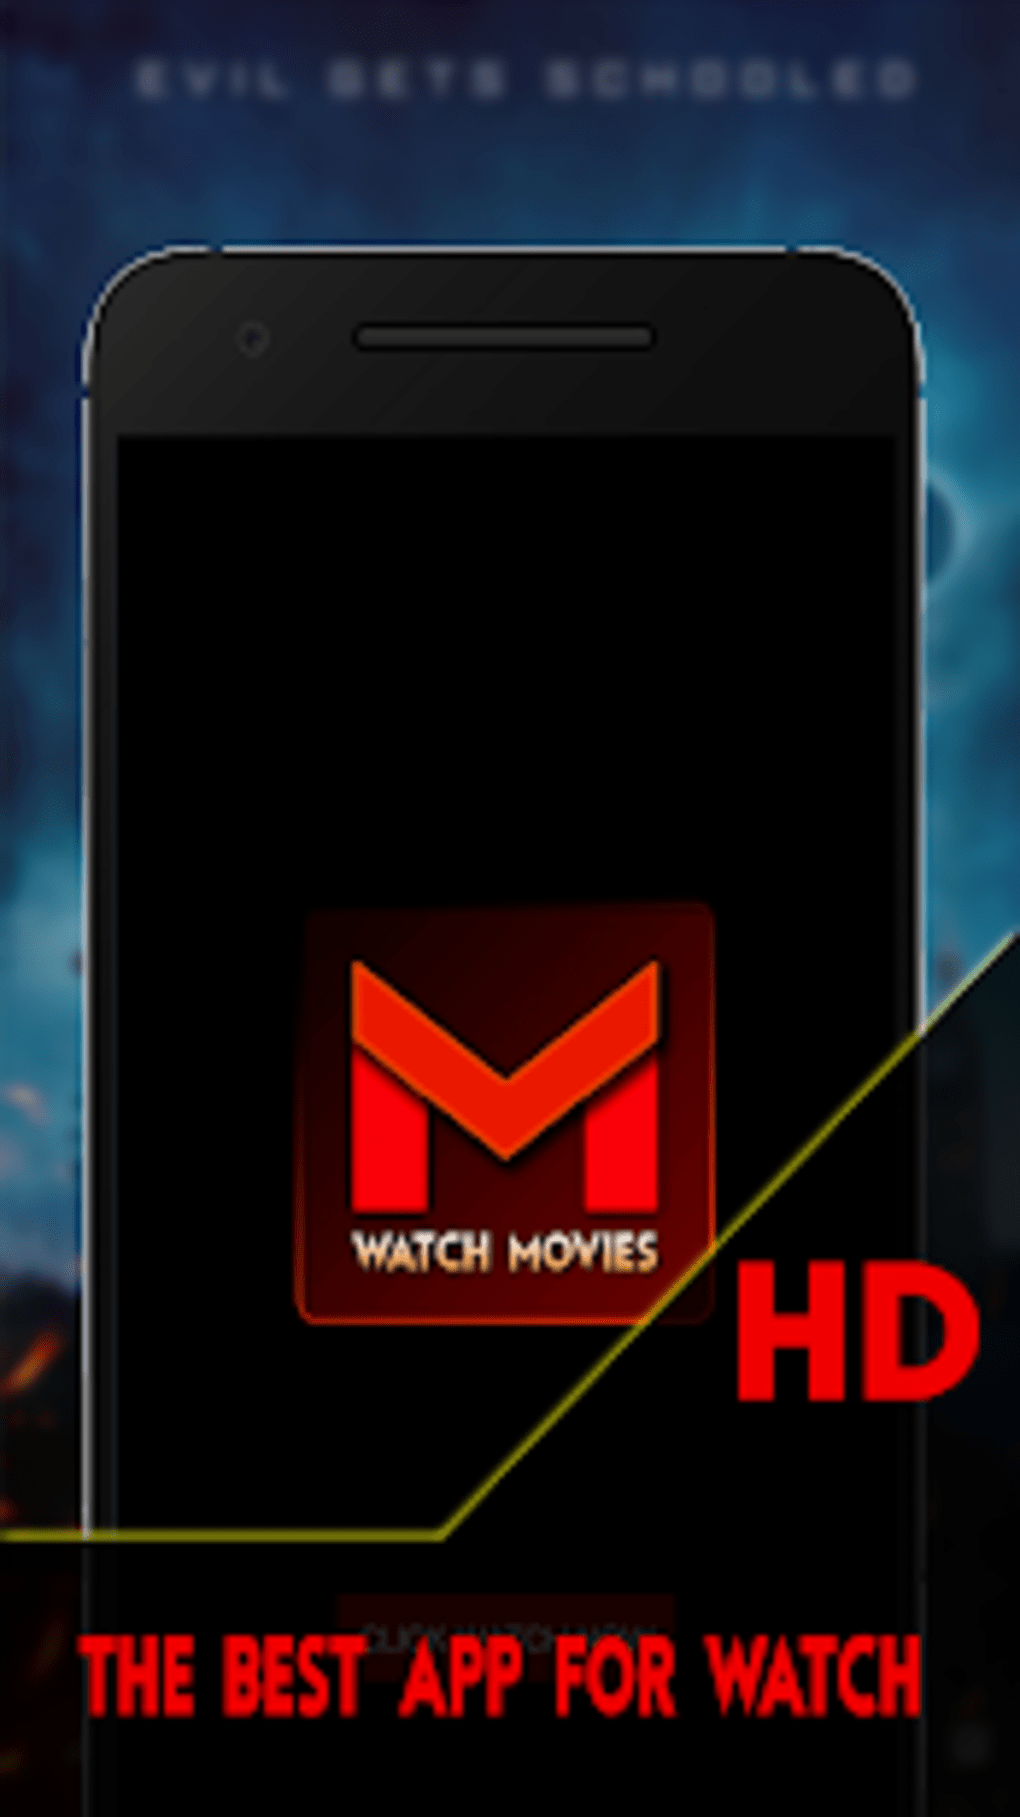 newest movies hd app free download